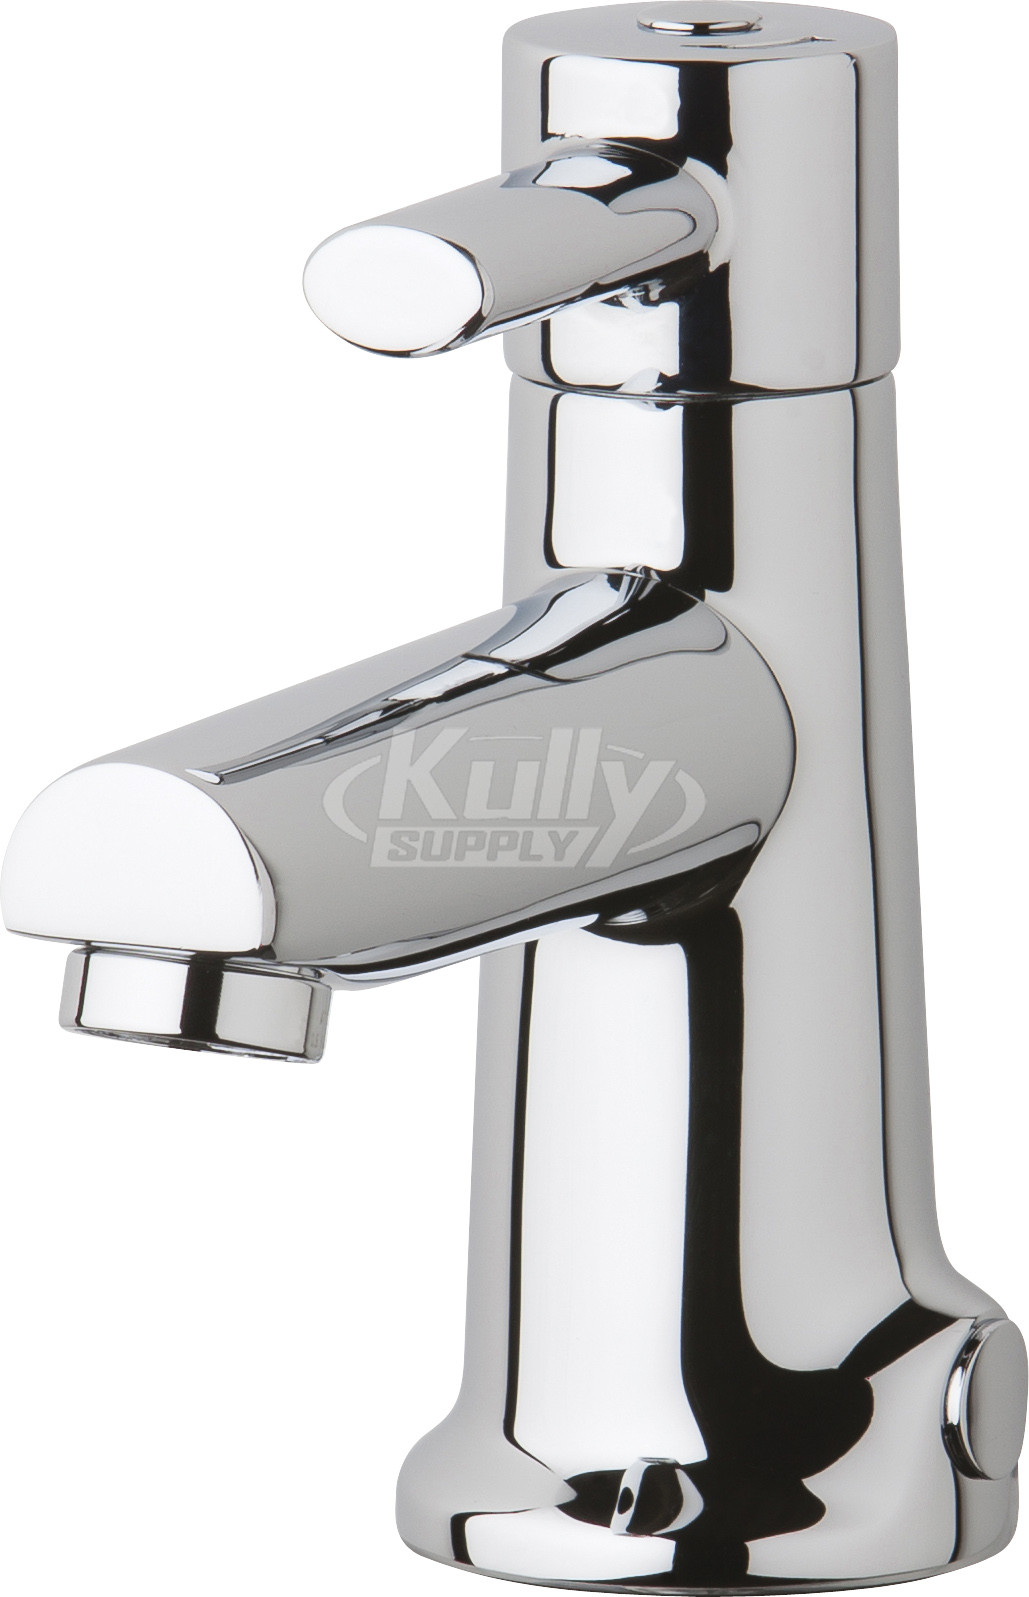 Chicago 3511-E2805AB Hot & Cold Water Mixing Sink Faucet